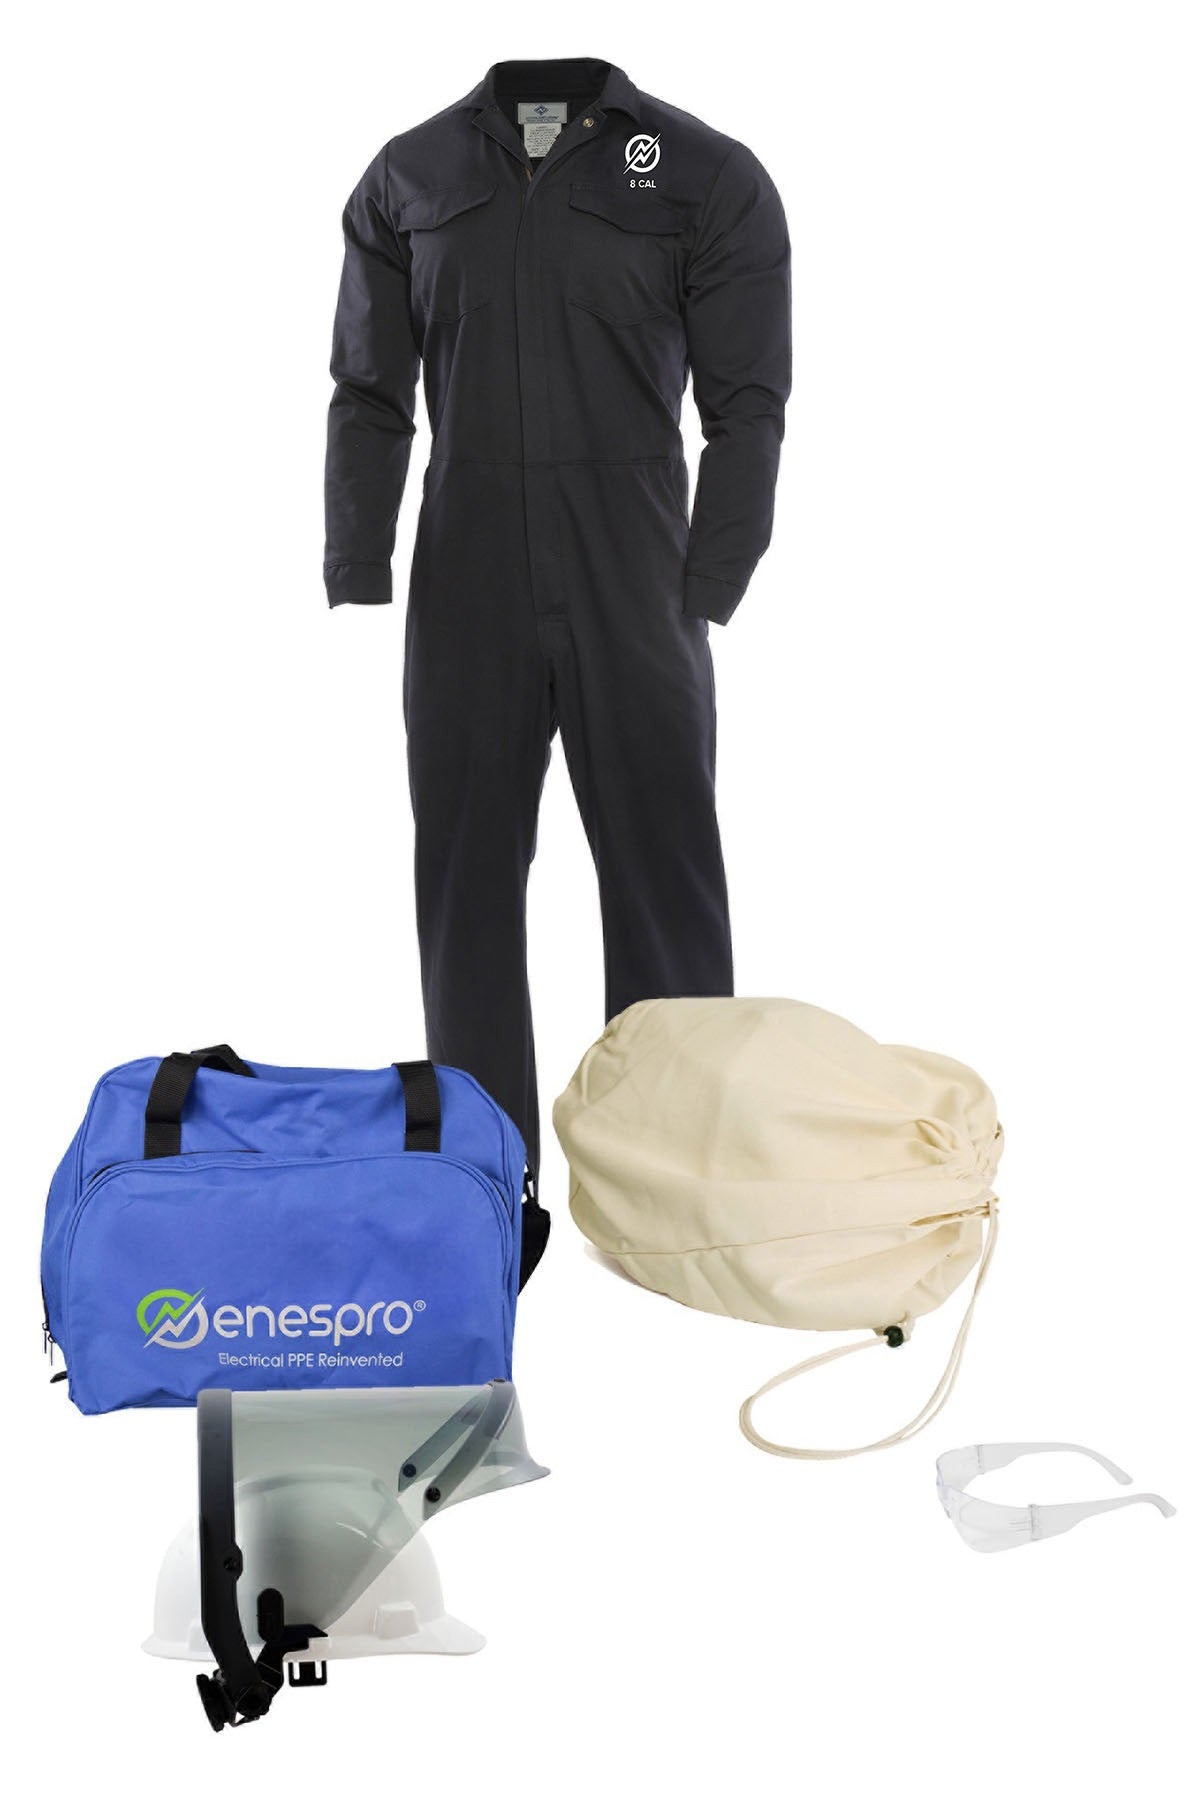 Enespro ArcGuard 8 cal Coverall Arc Flash Kit- No Gloves